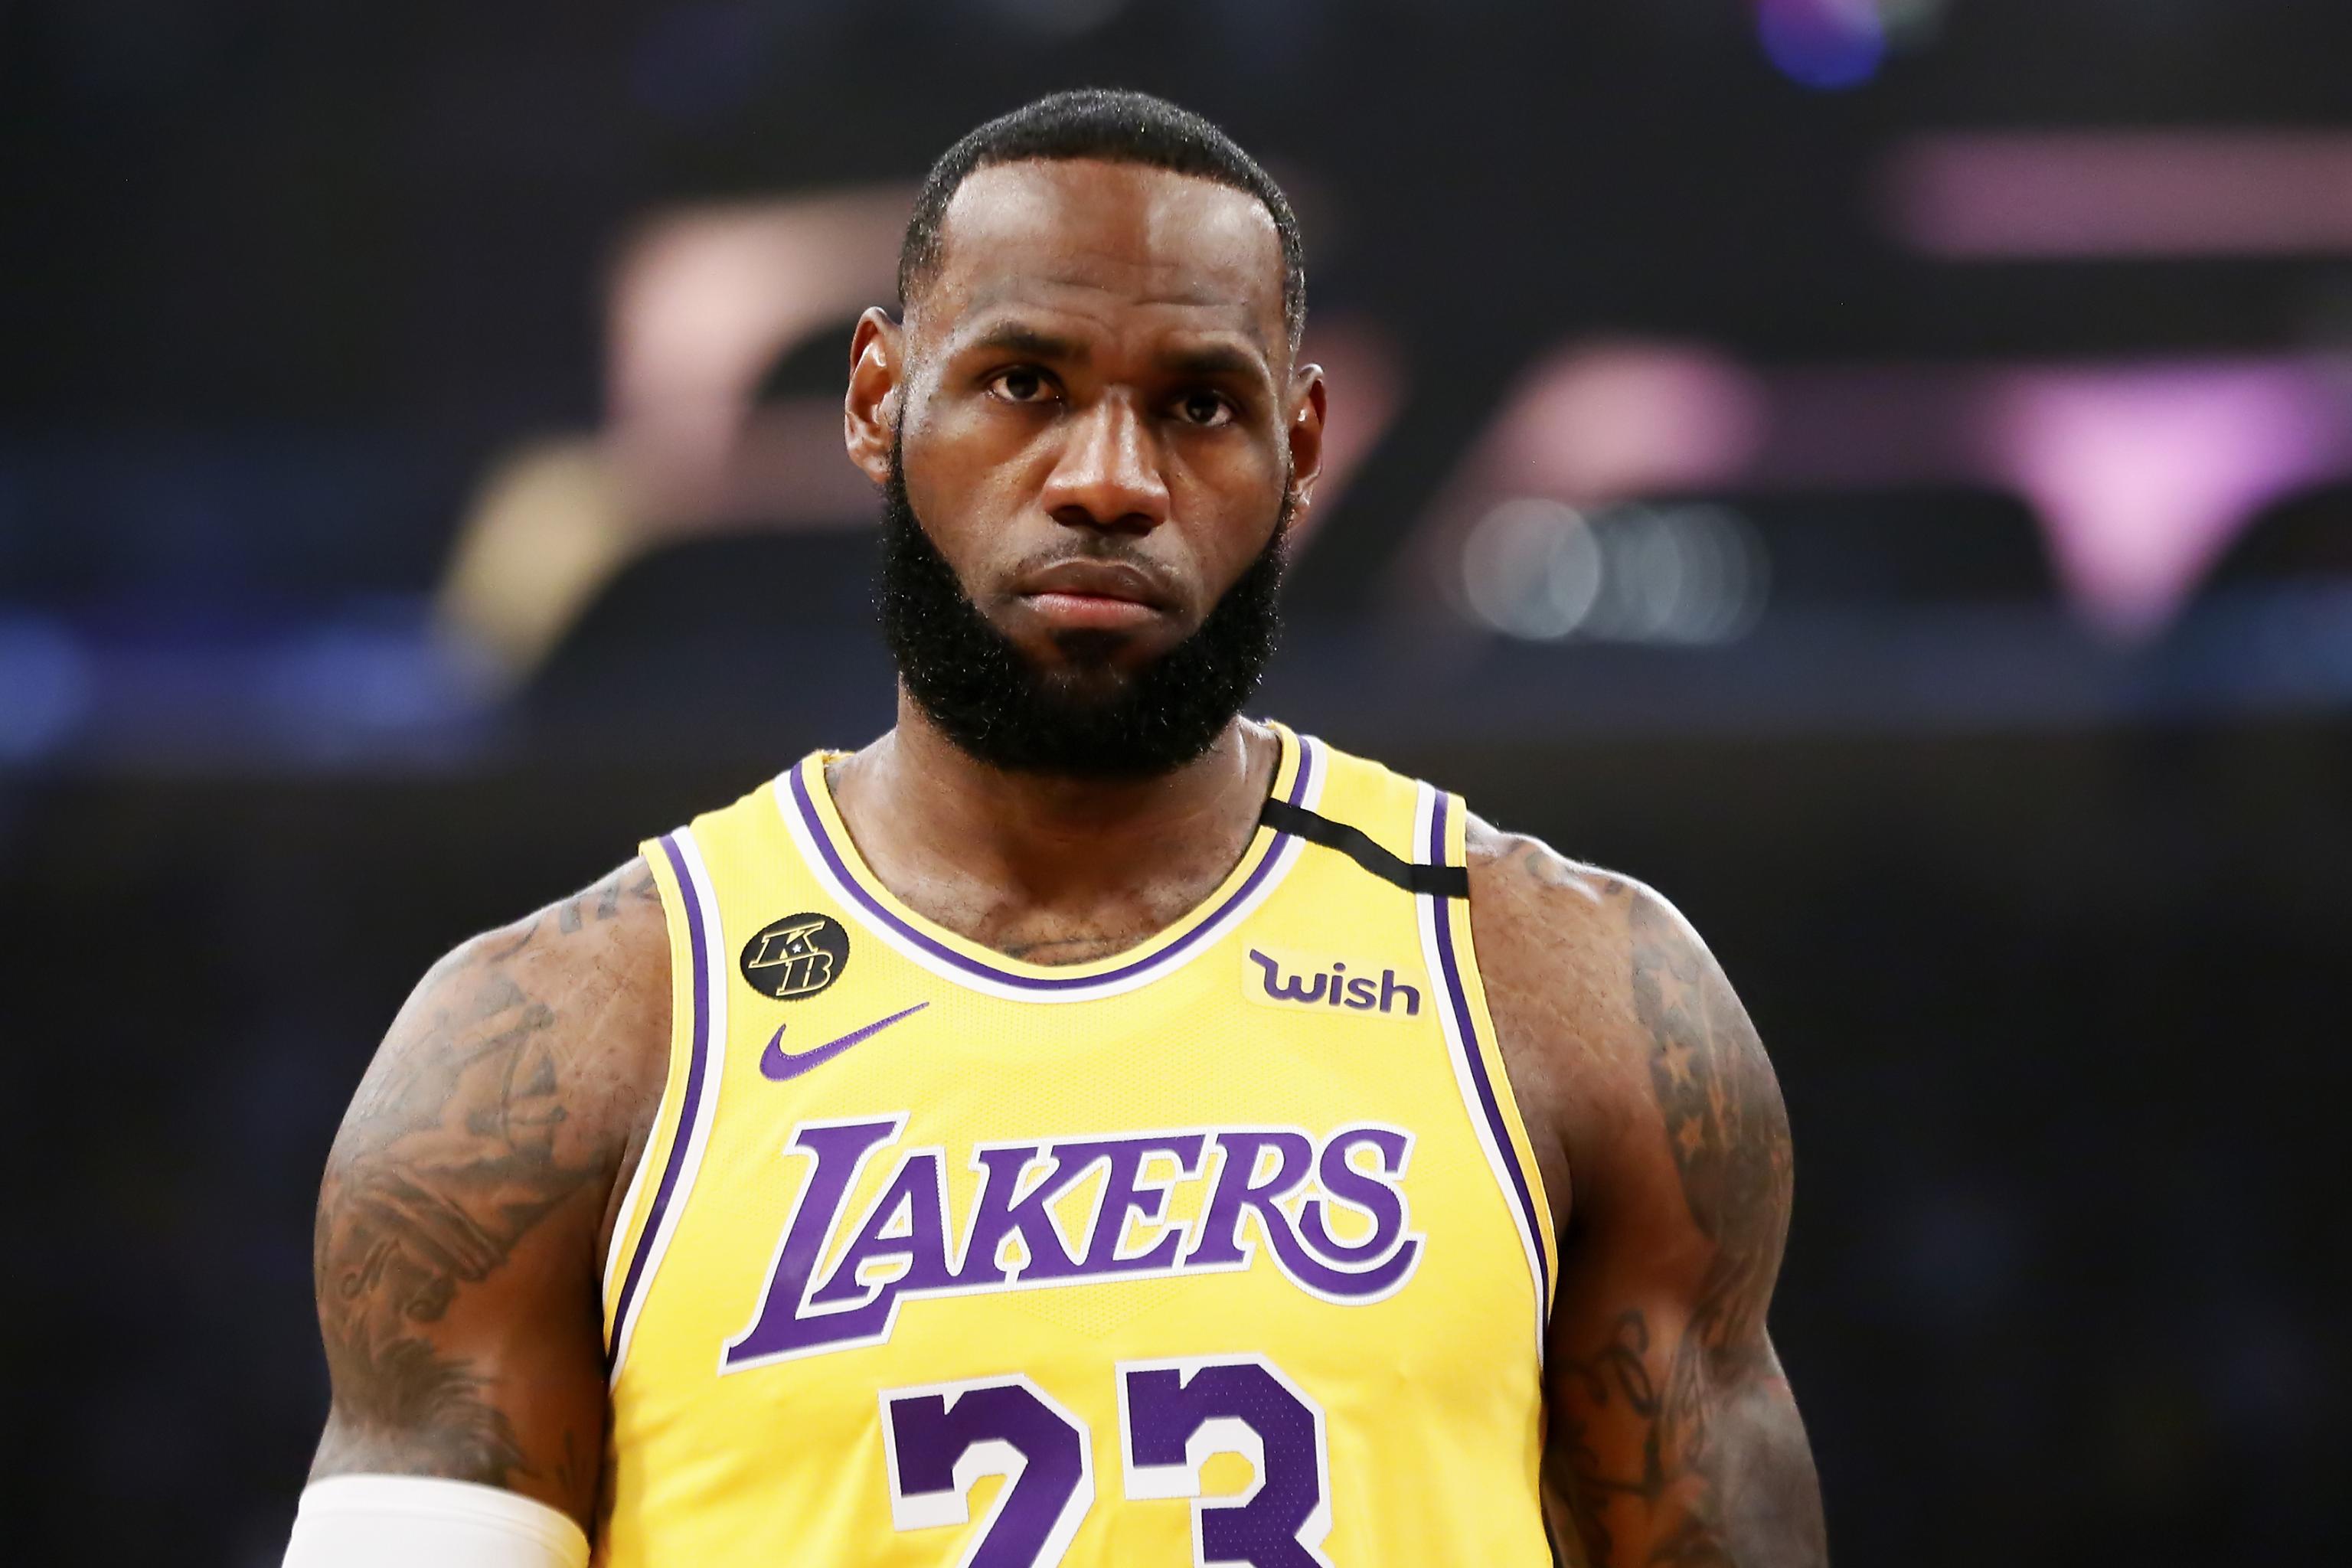 Lakers Lebron James Says He Won T Have Any Closure If Nba Cancels Season Bleacher Report Latest News Videos And Highlights